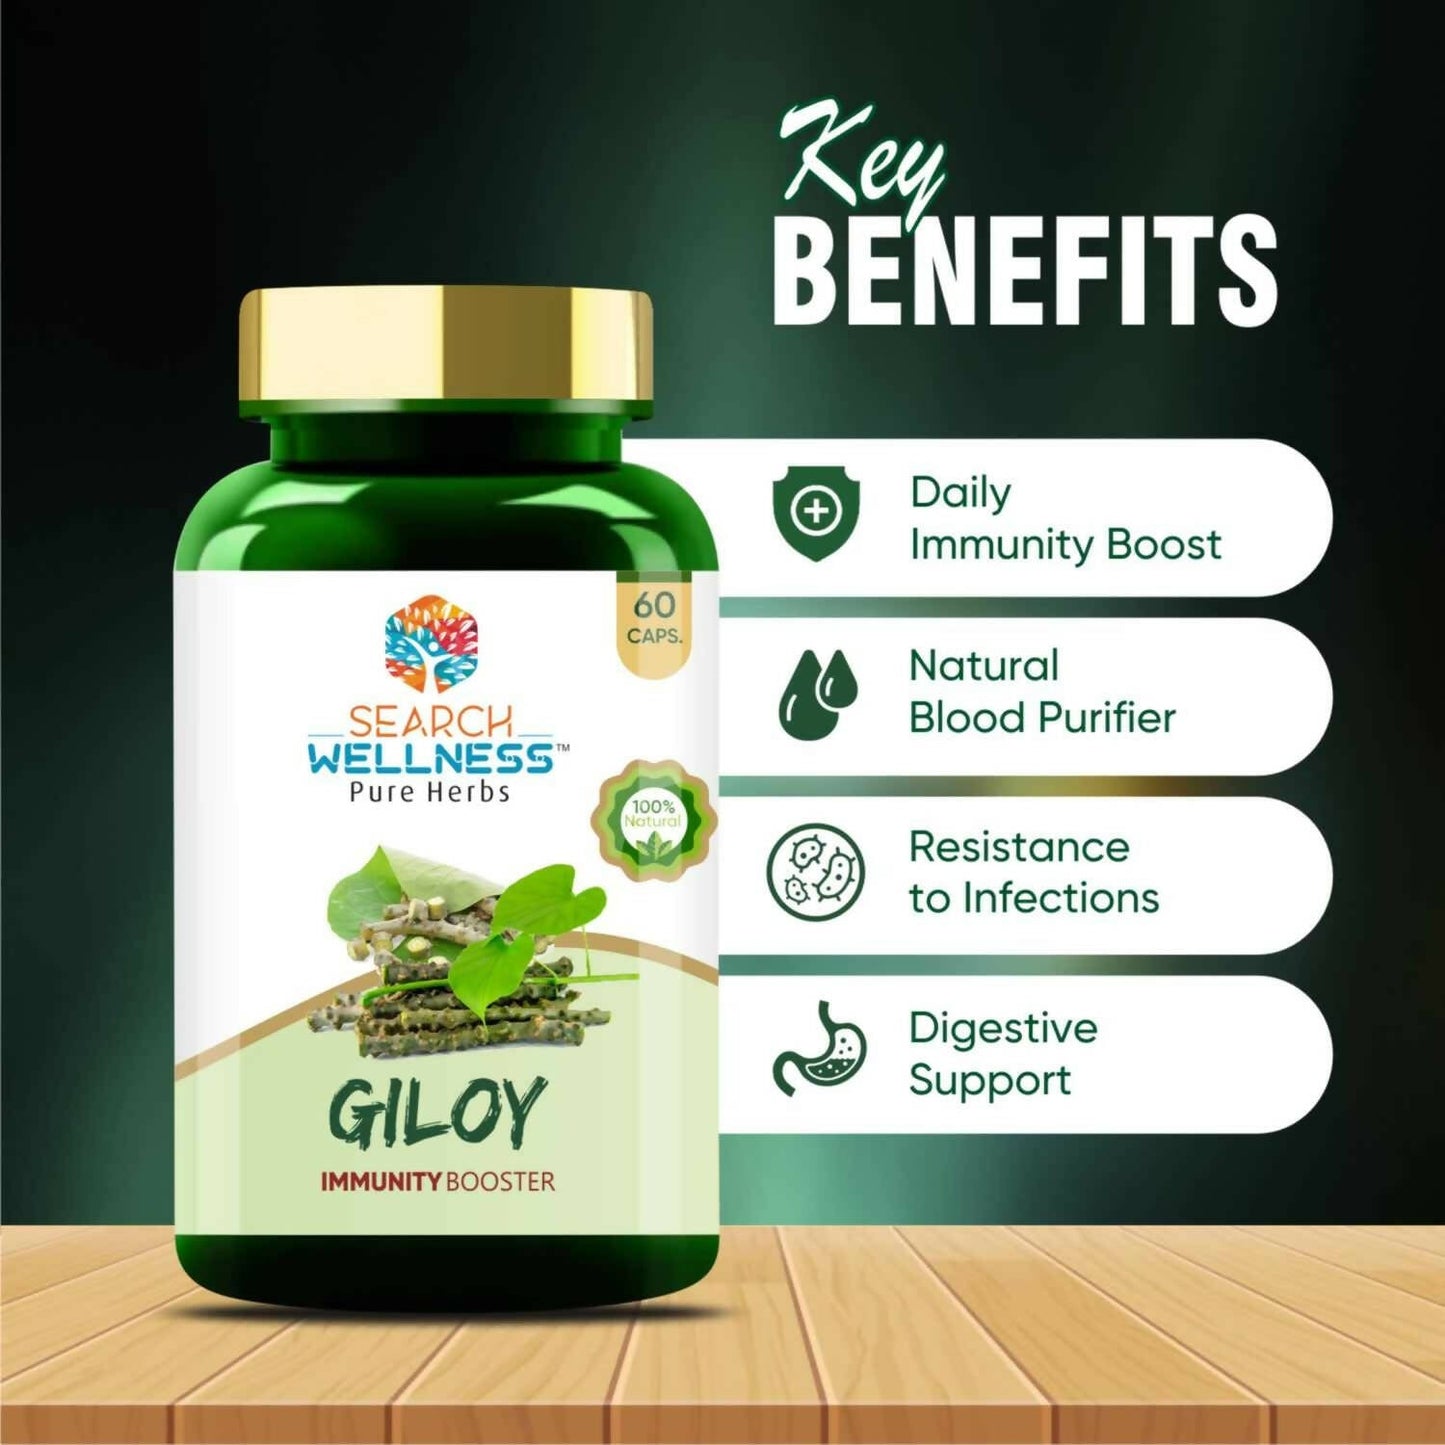 Search Wellness Giloy Capsules